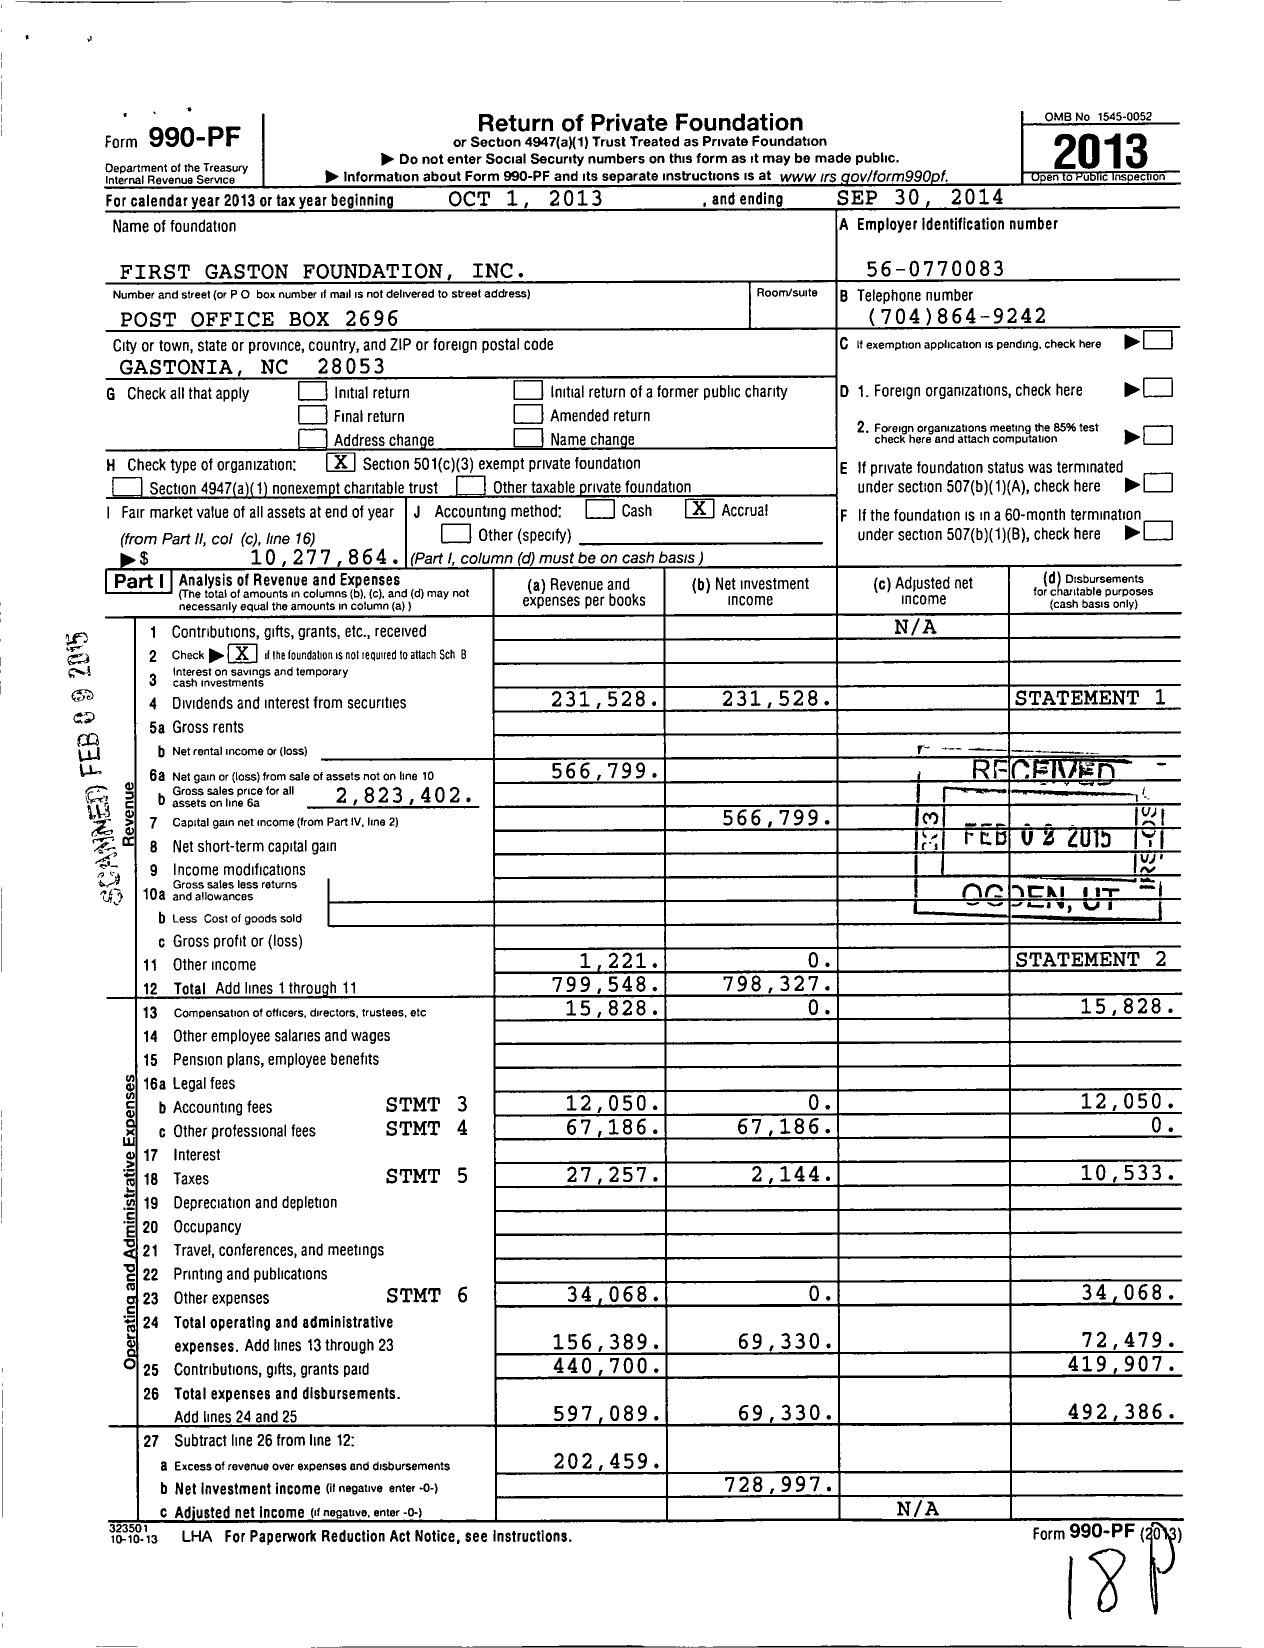 Image of first page of 2013 Form 990PF for First Gaston Foundation